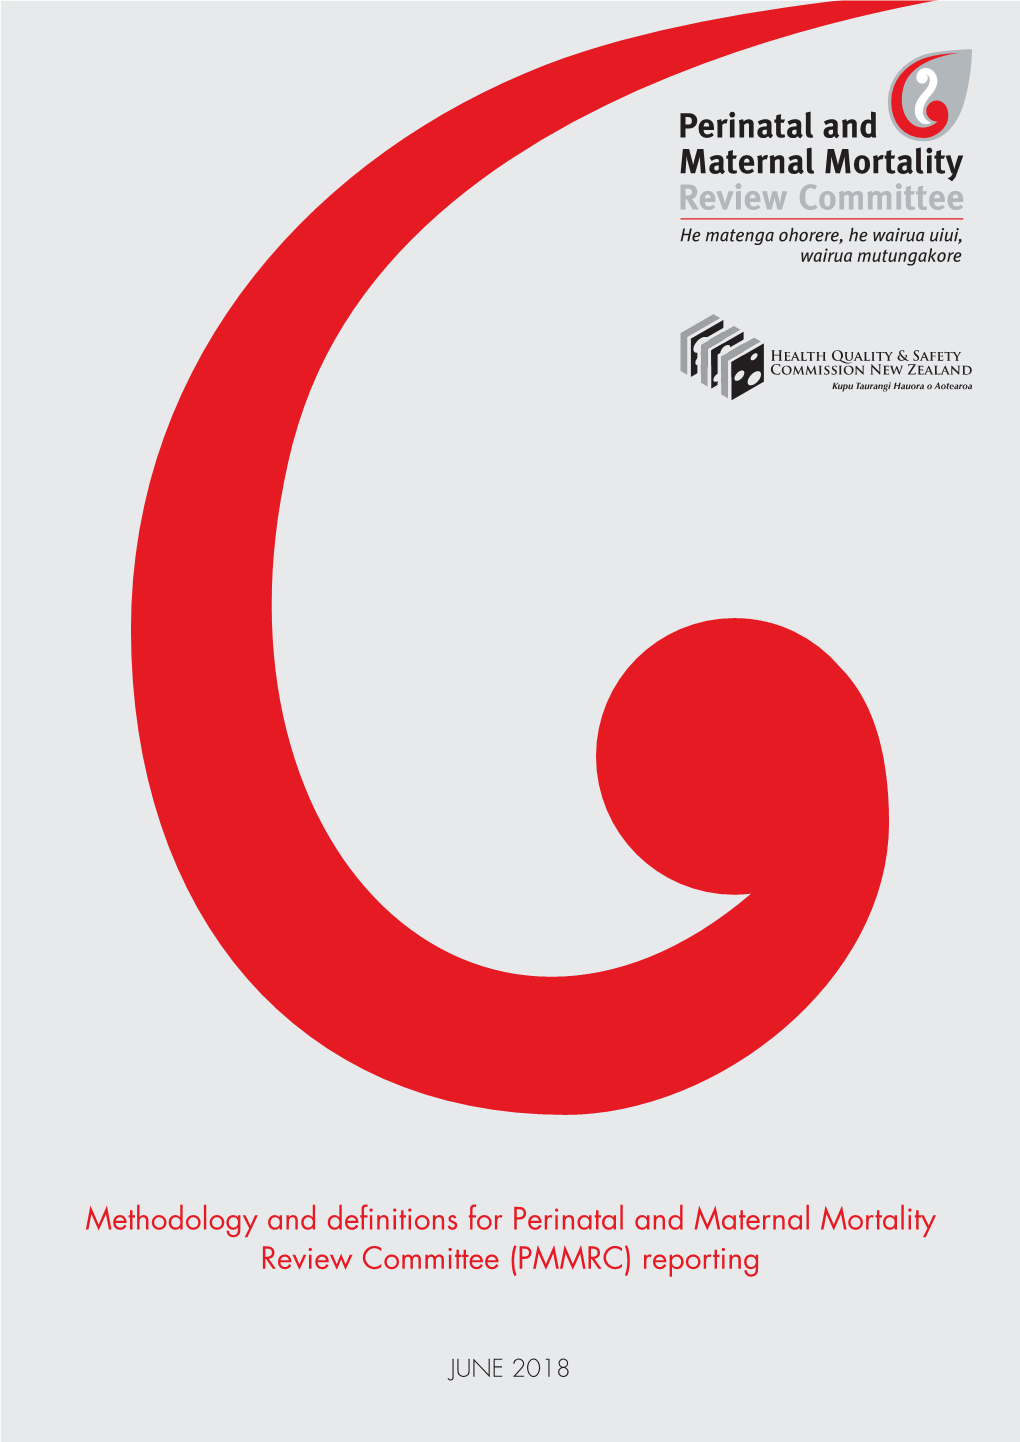 Methodology and Definitions for Perinatal and Maternal Mortality Review Committee (PMMRC) Reporting